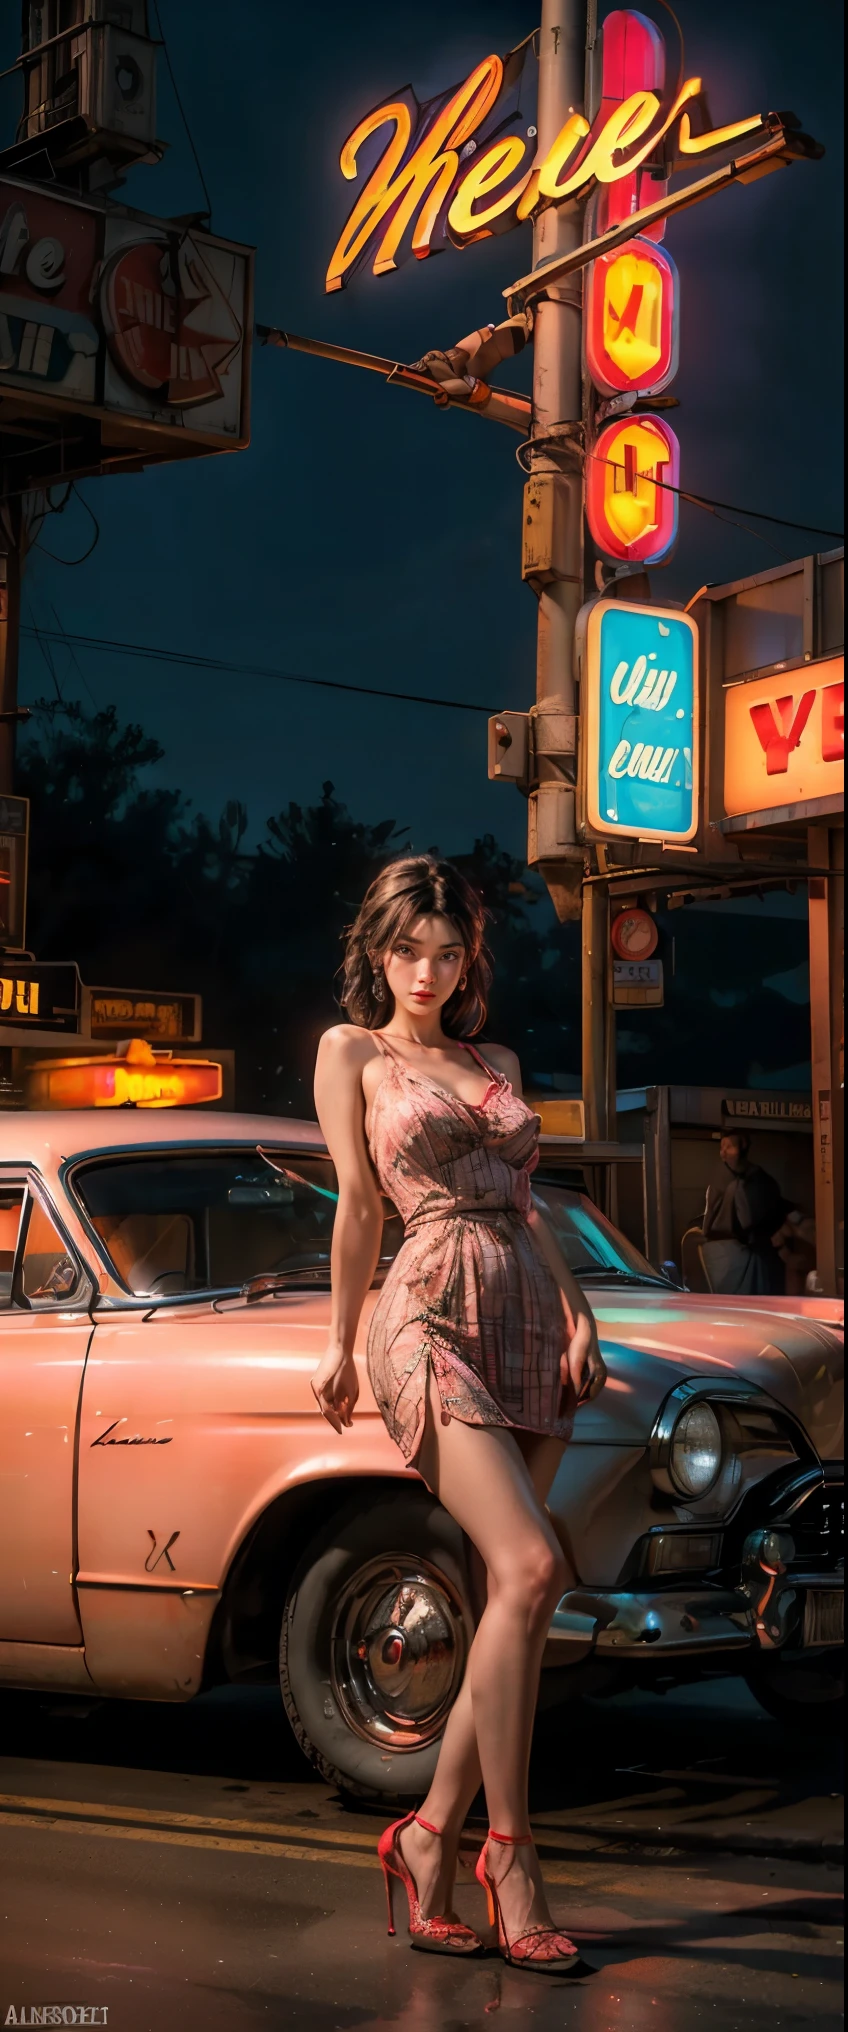 ((masterpiece, highest quality, Highest image quality, High resolution, photorealistic, Raw photo, 8K)), arafed view of a motel with a car parked in front of it, with neon signs, A woman waiting for a guest in front of a motel, seduction, short dress and high heels, route 6 6, neon signs, 1 9 5 0 s americana tourism, some have neon signs, neon lights outside, neon advertisements, gigantic neon signs, neon shops, by Arnie Swekel, few neon signs, neon signs in background,